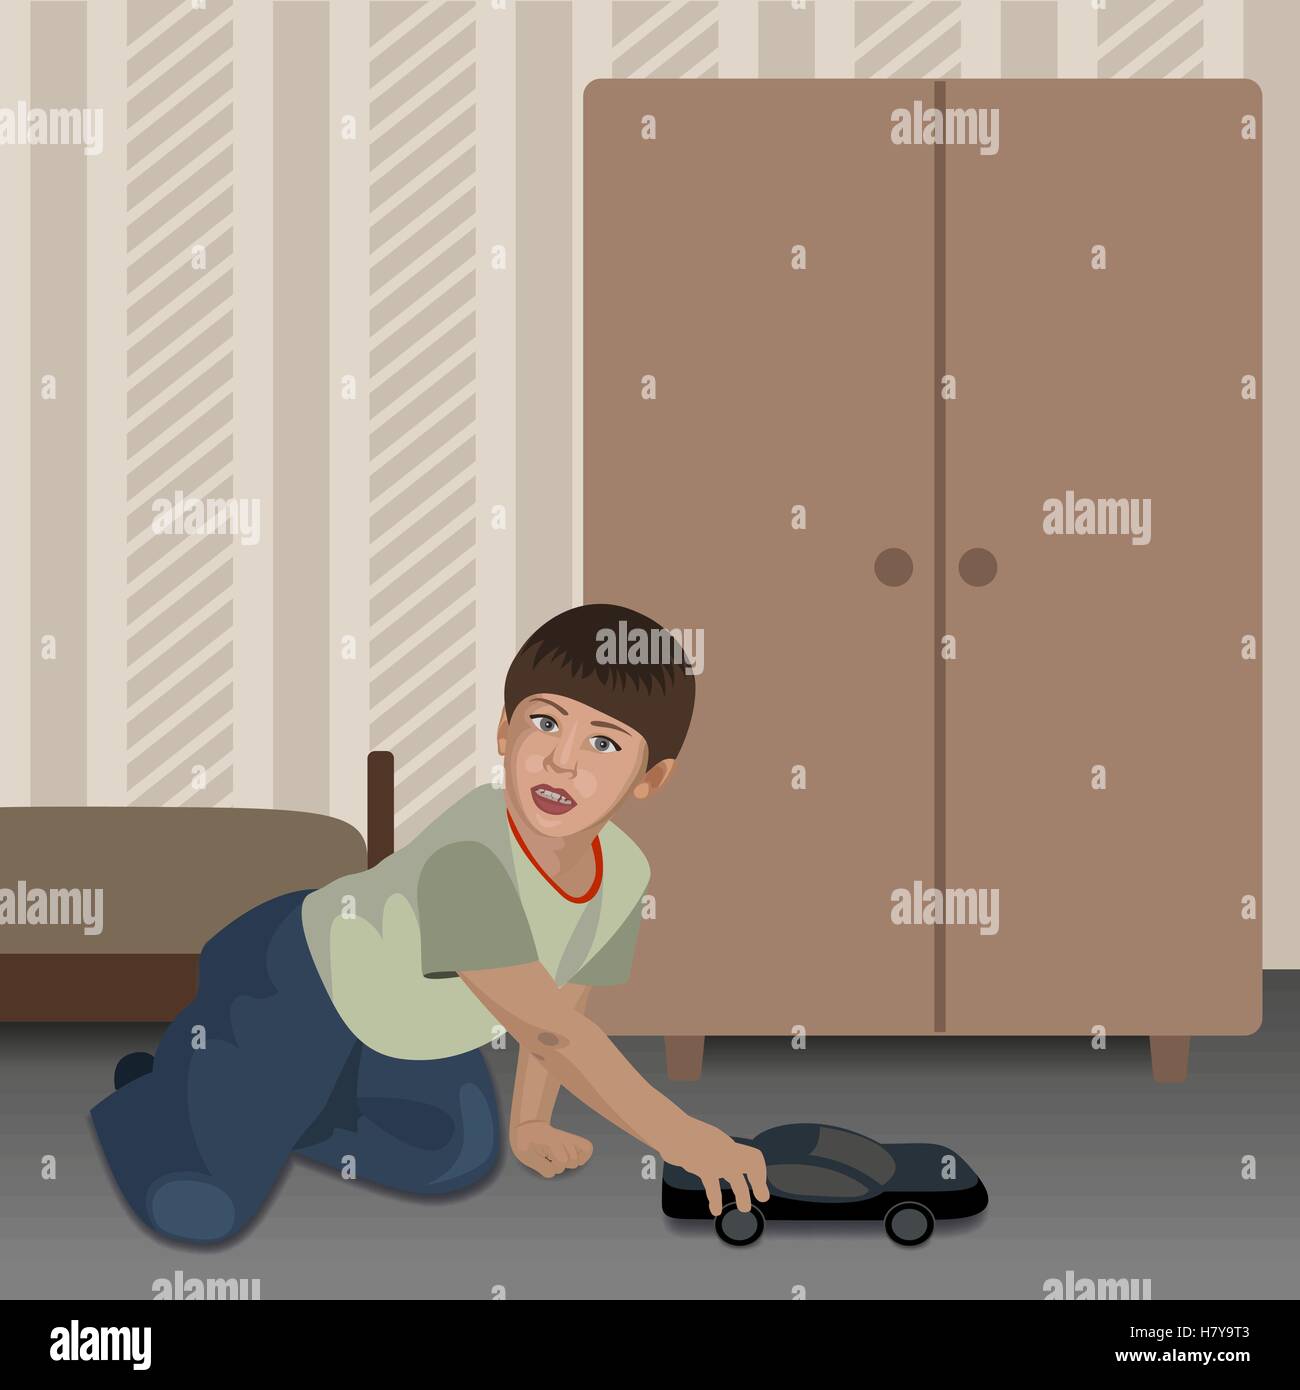 Playing Boy In The Room Stock Vector